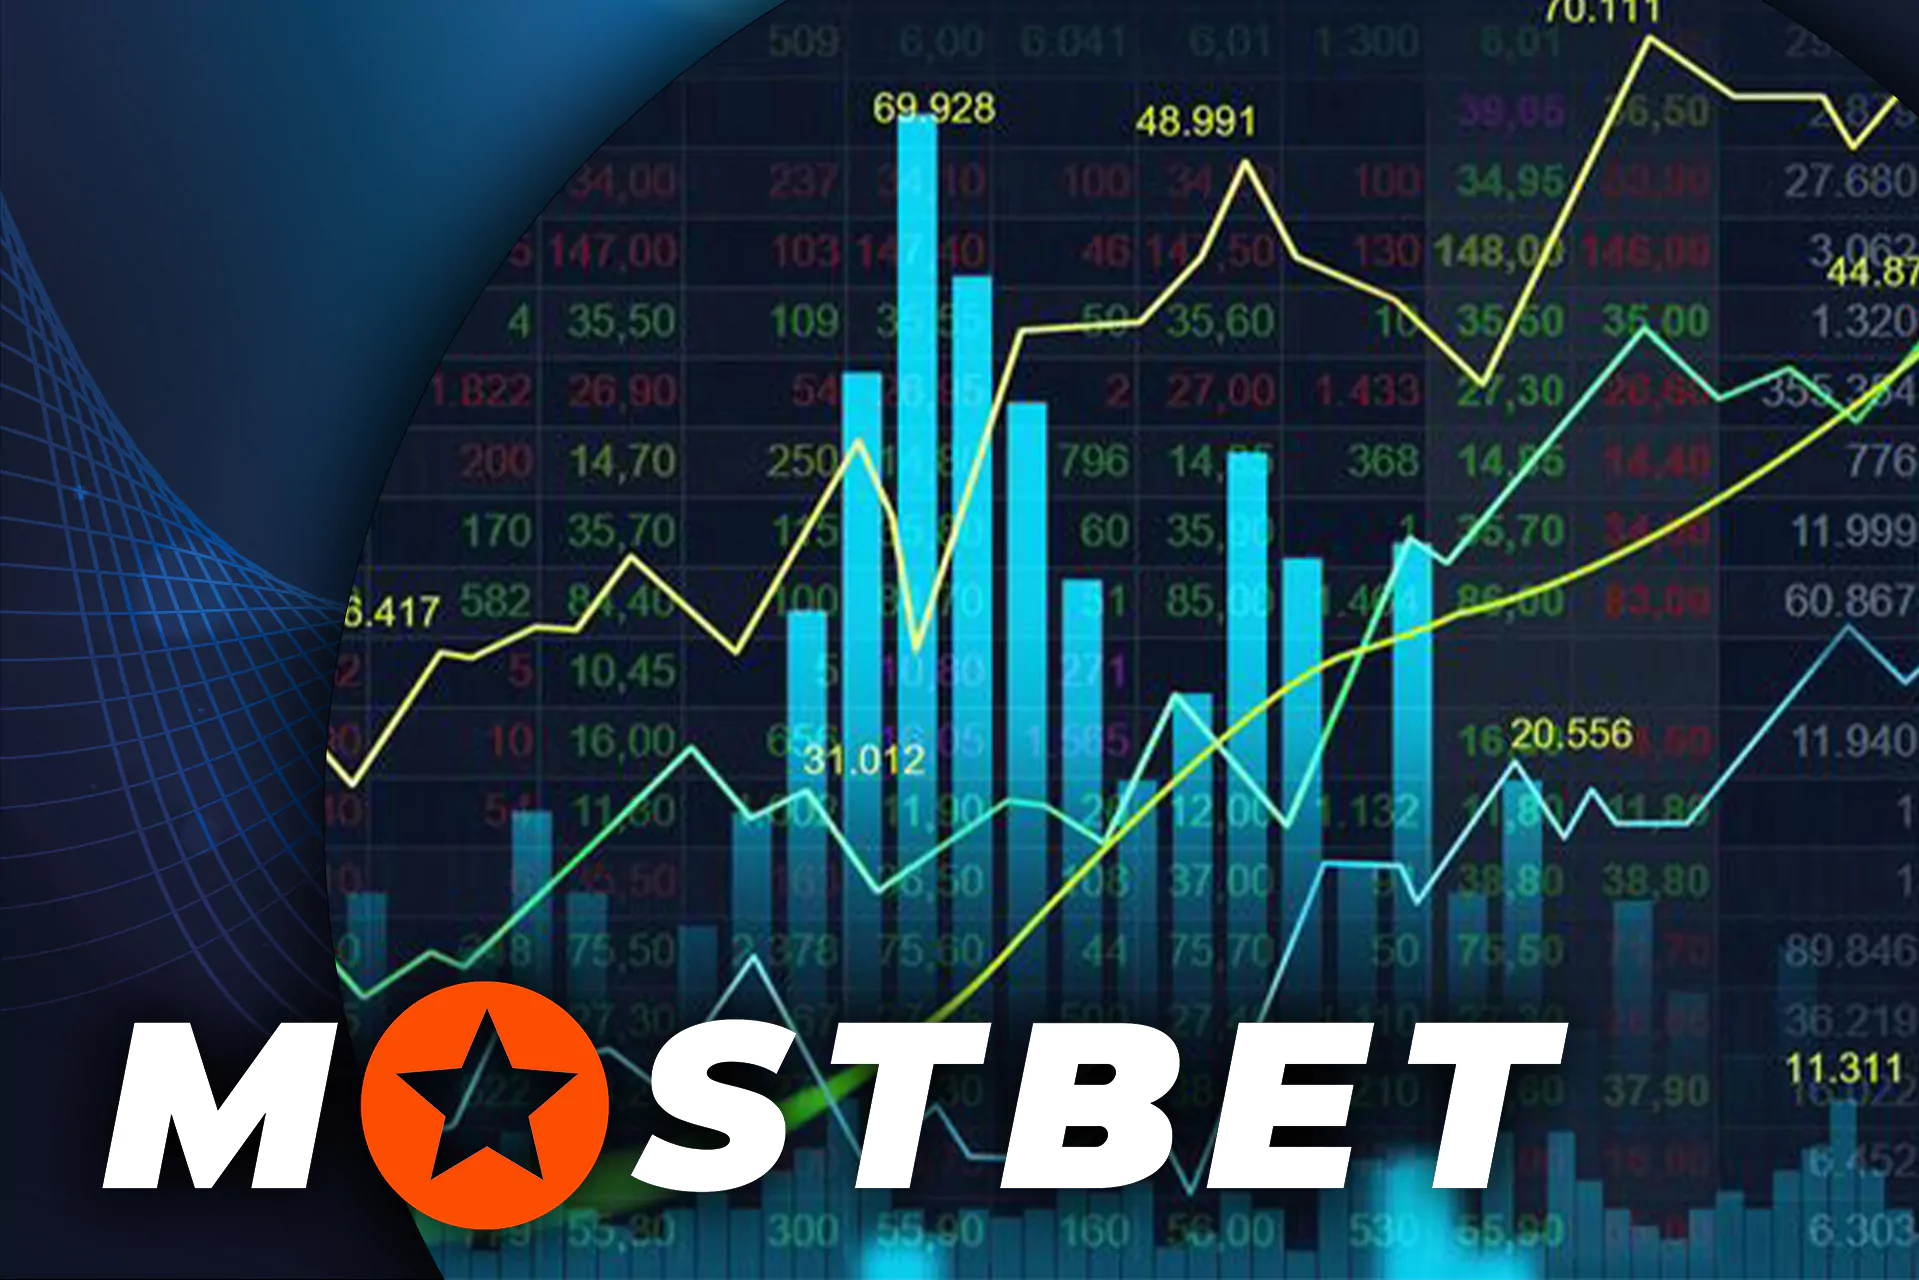 Results and statistics at Mostbet.